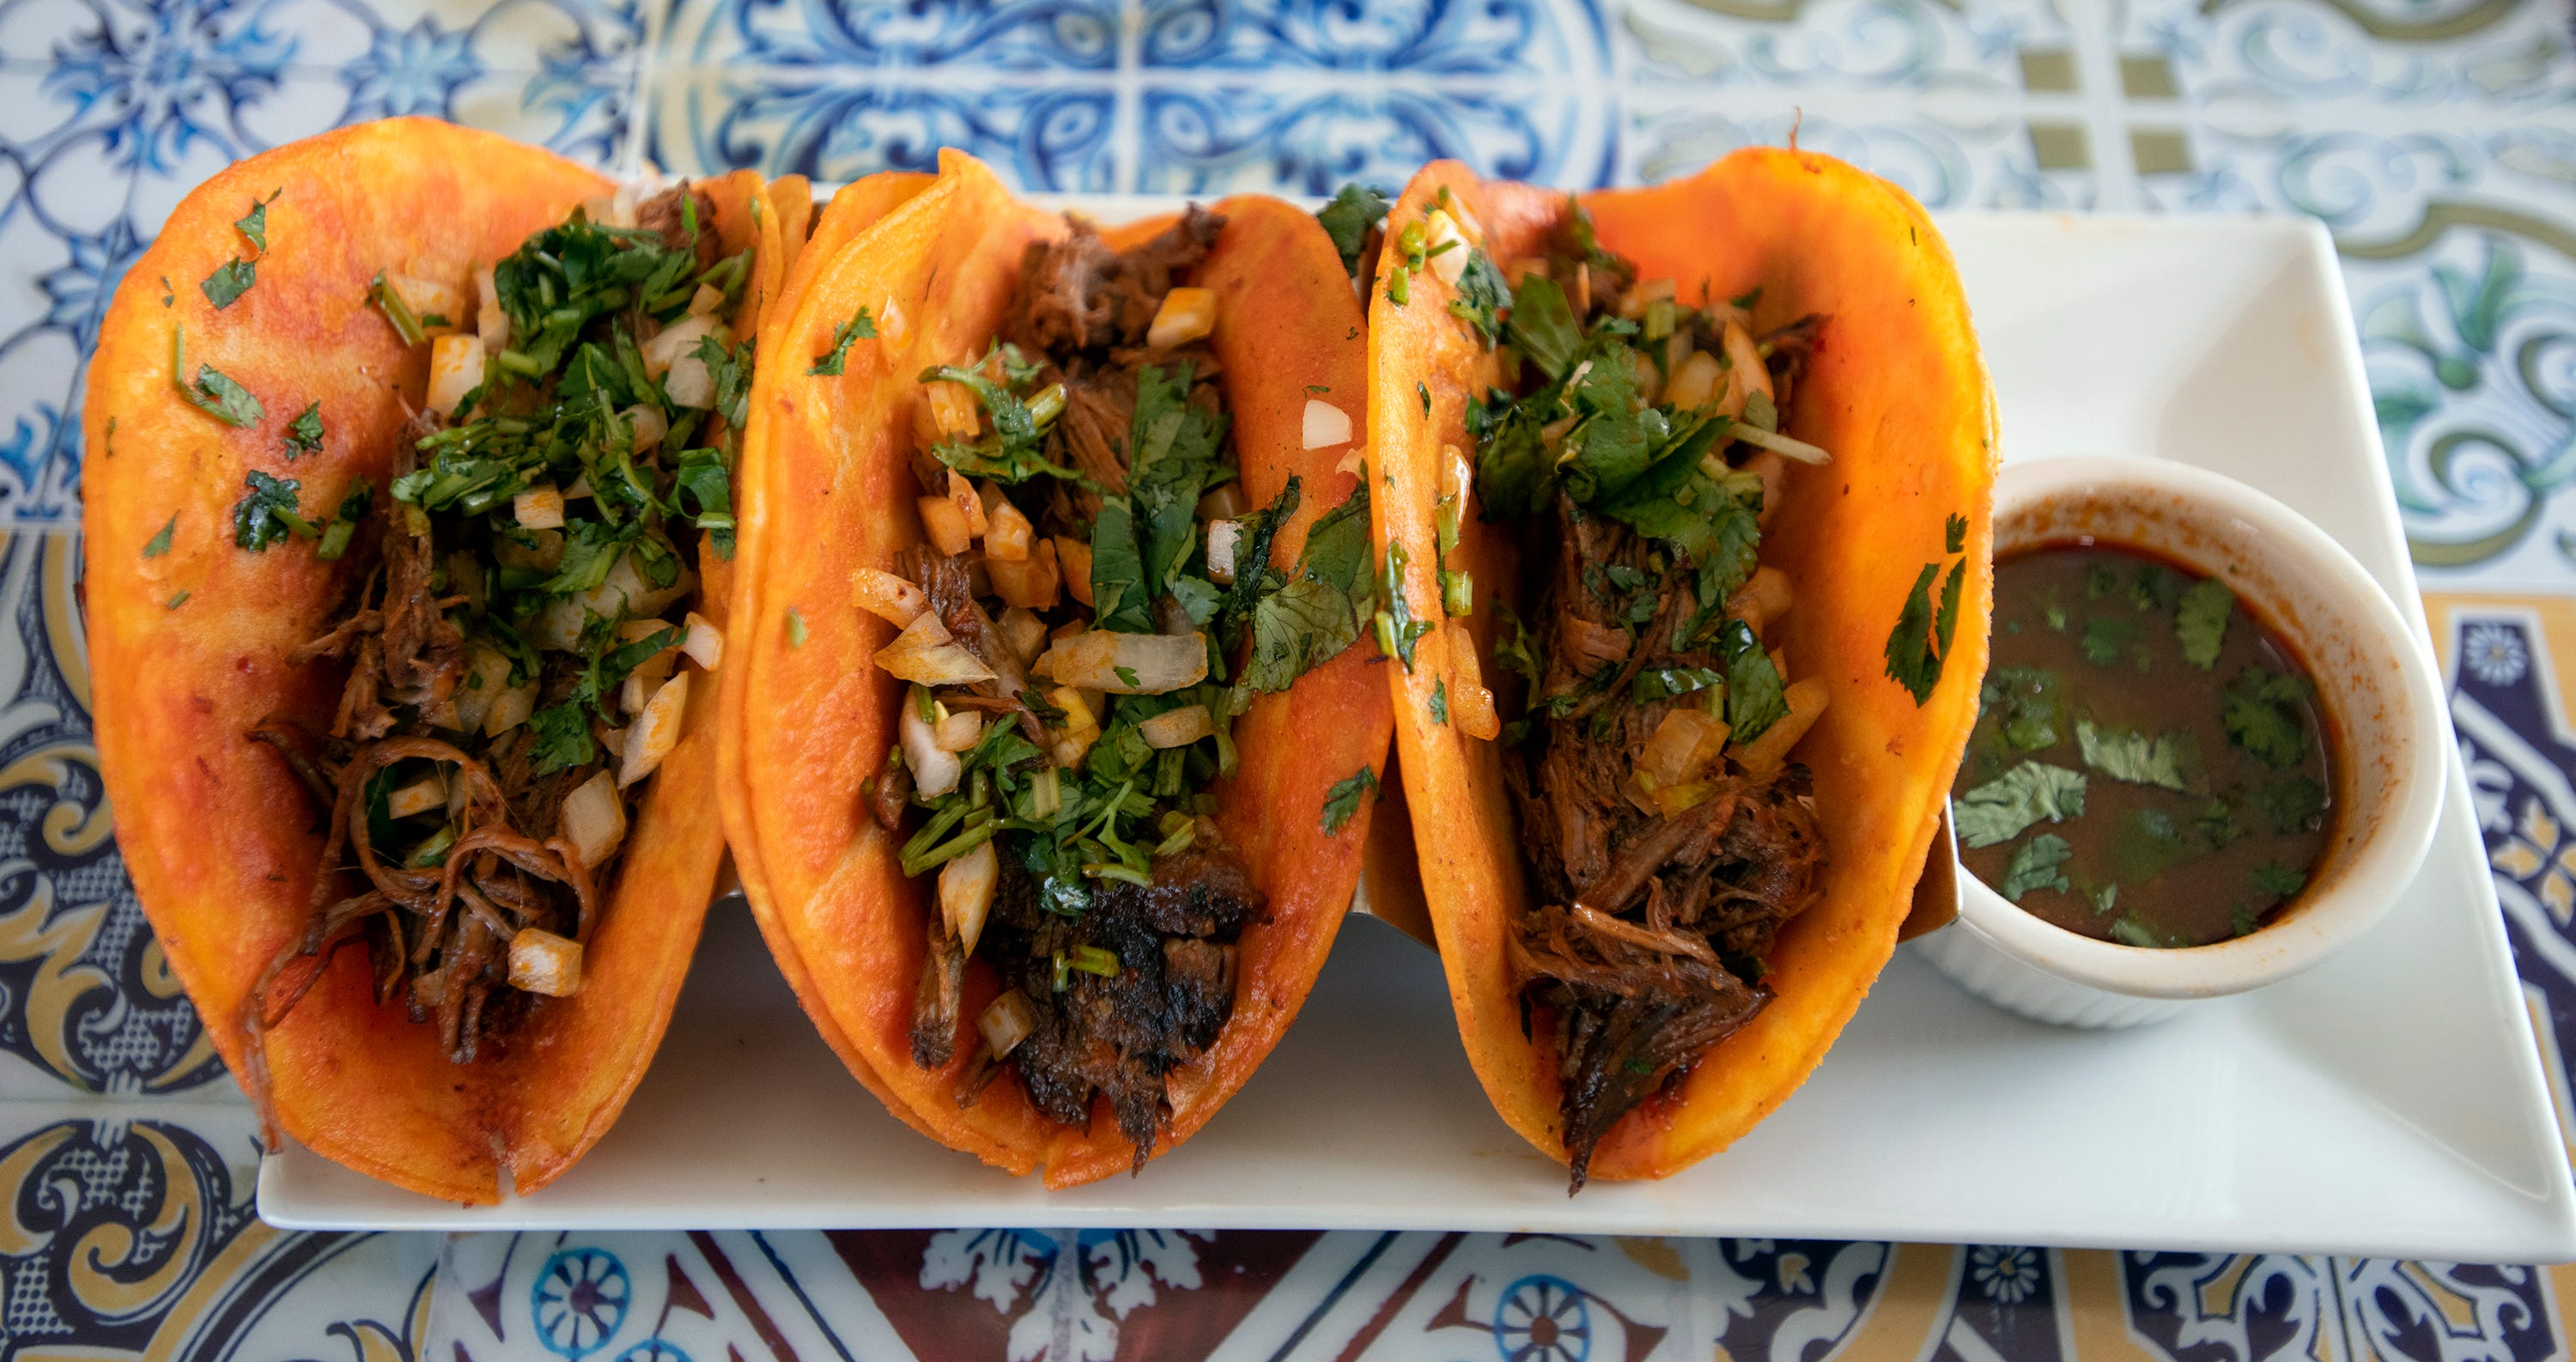 Where to find those juicy birria tacos locally